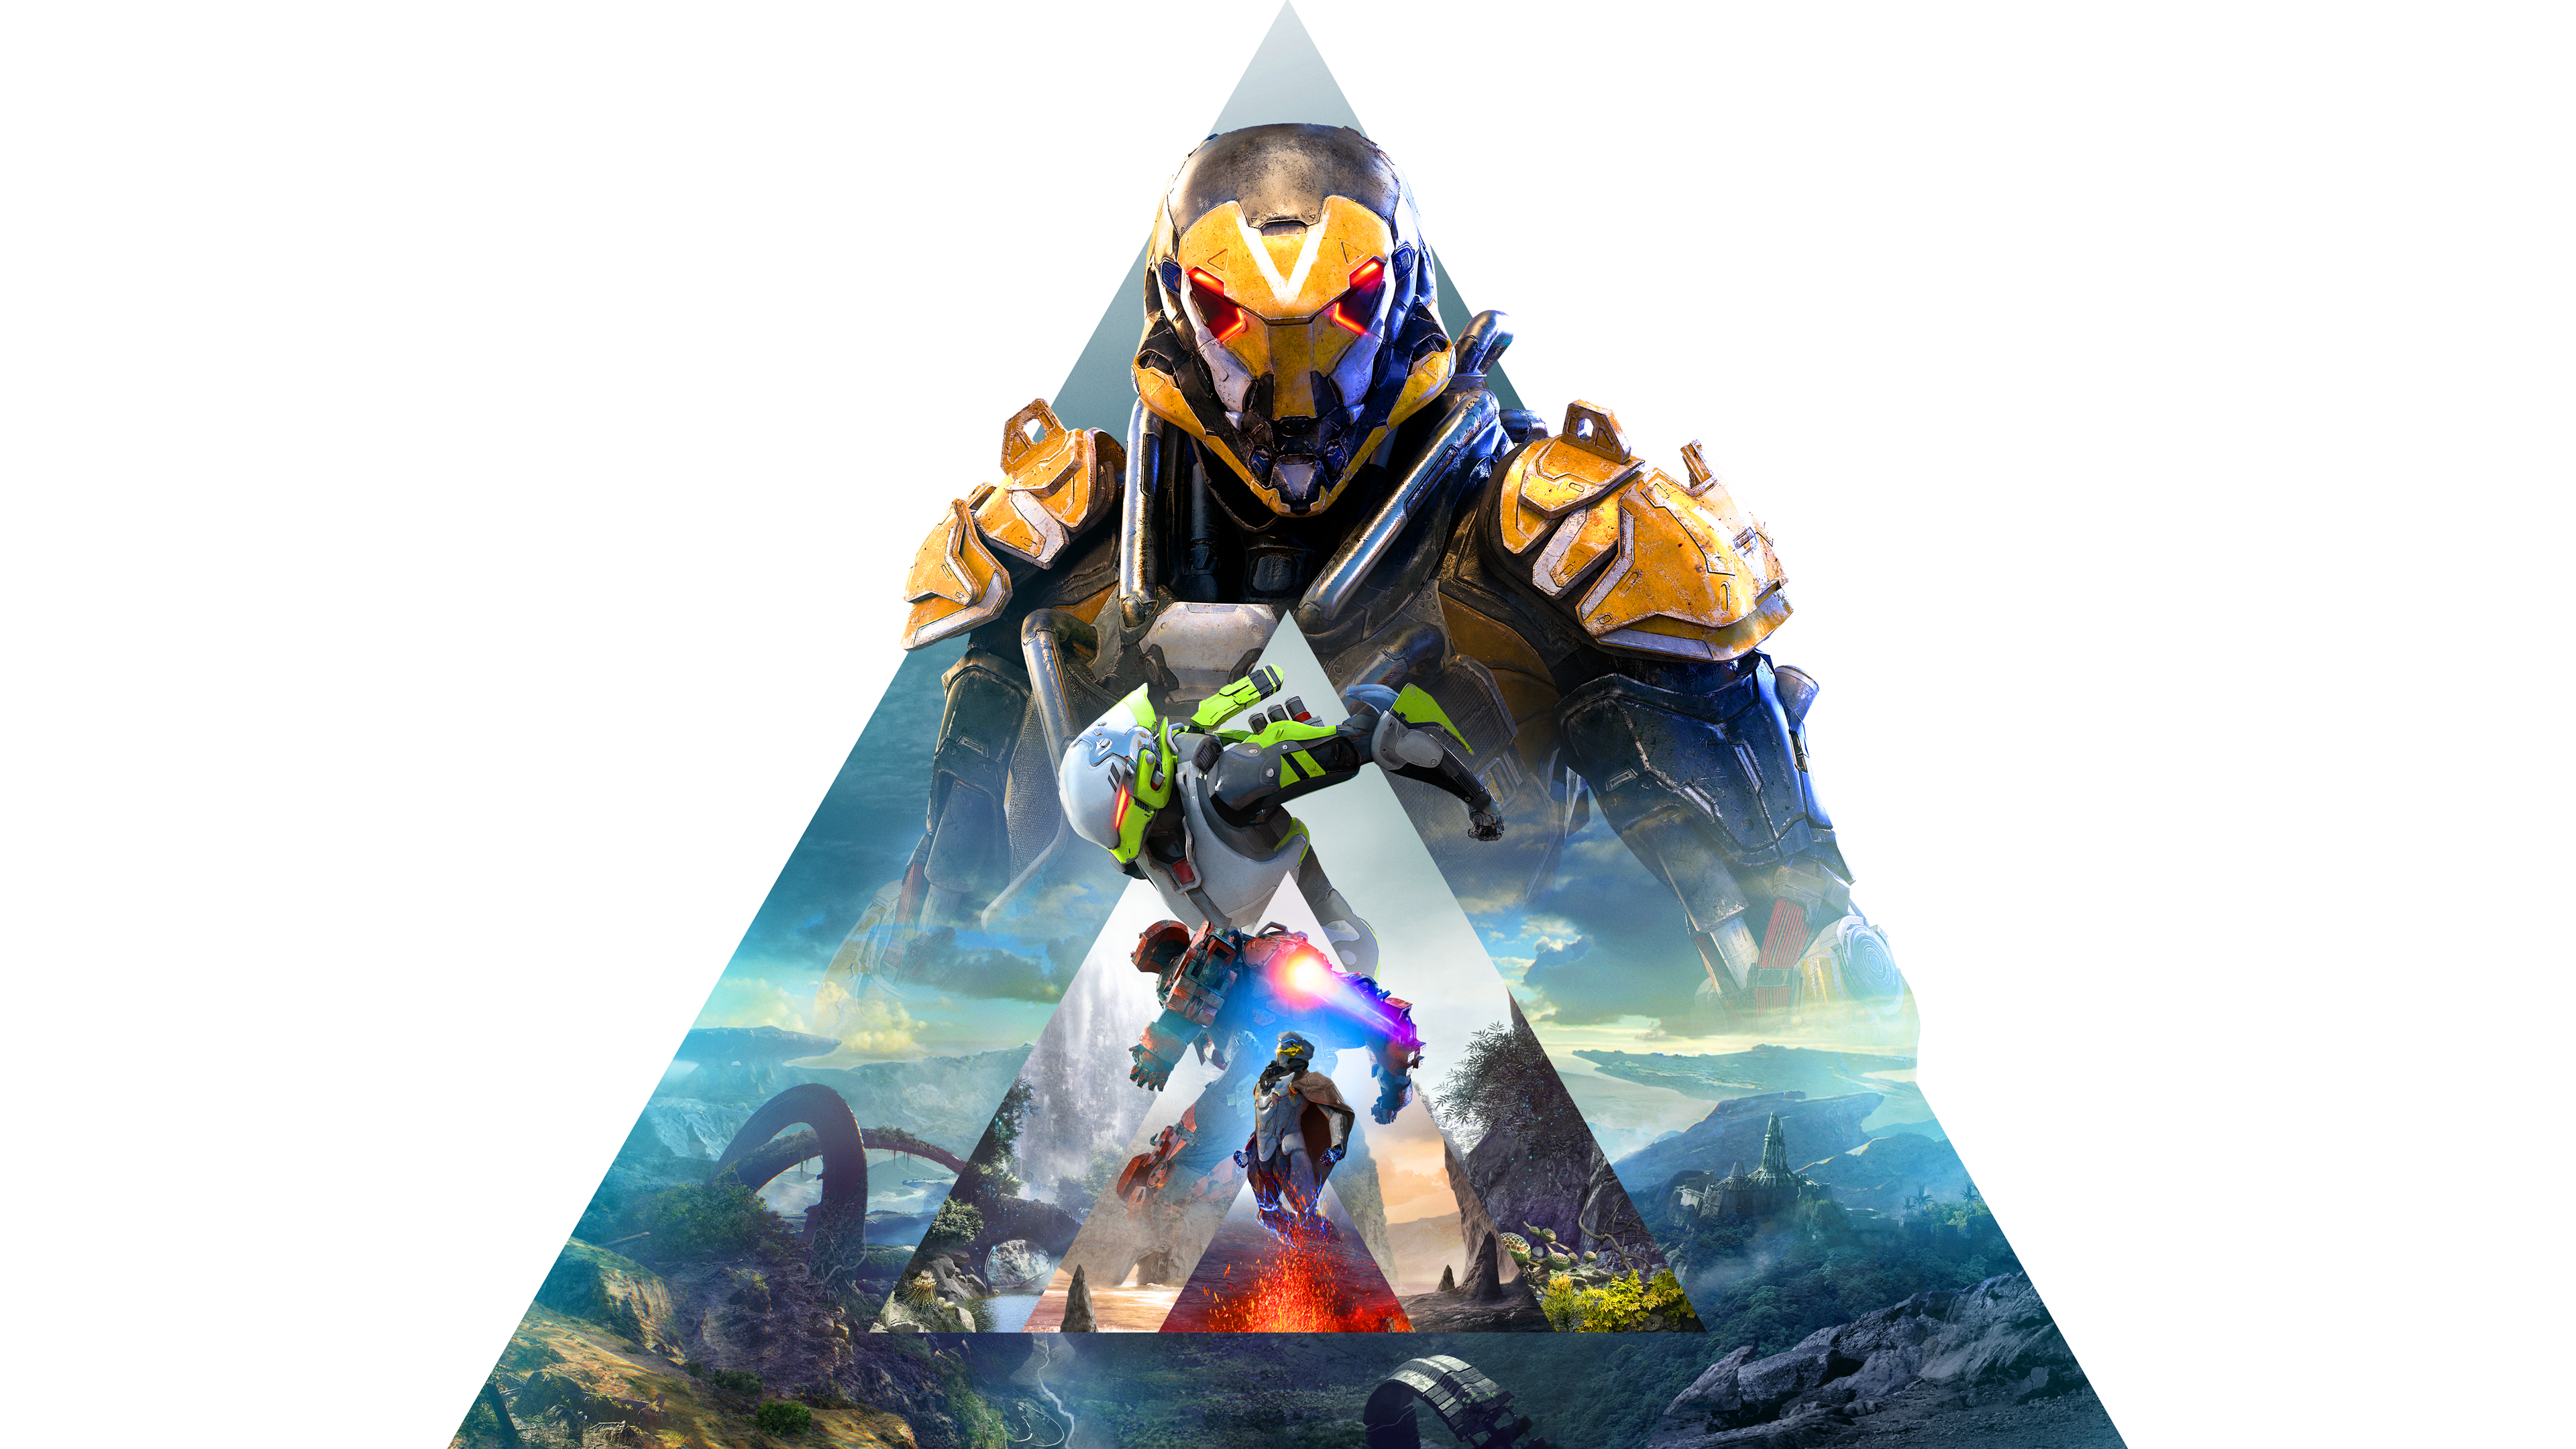 Anthem Video Game Art Video Games Simple Background White Background Minimalism Armor Pyramid Lookin 3840x2160